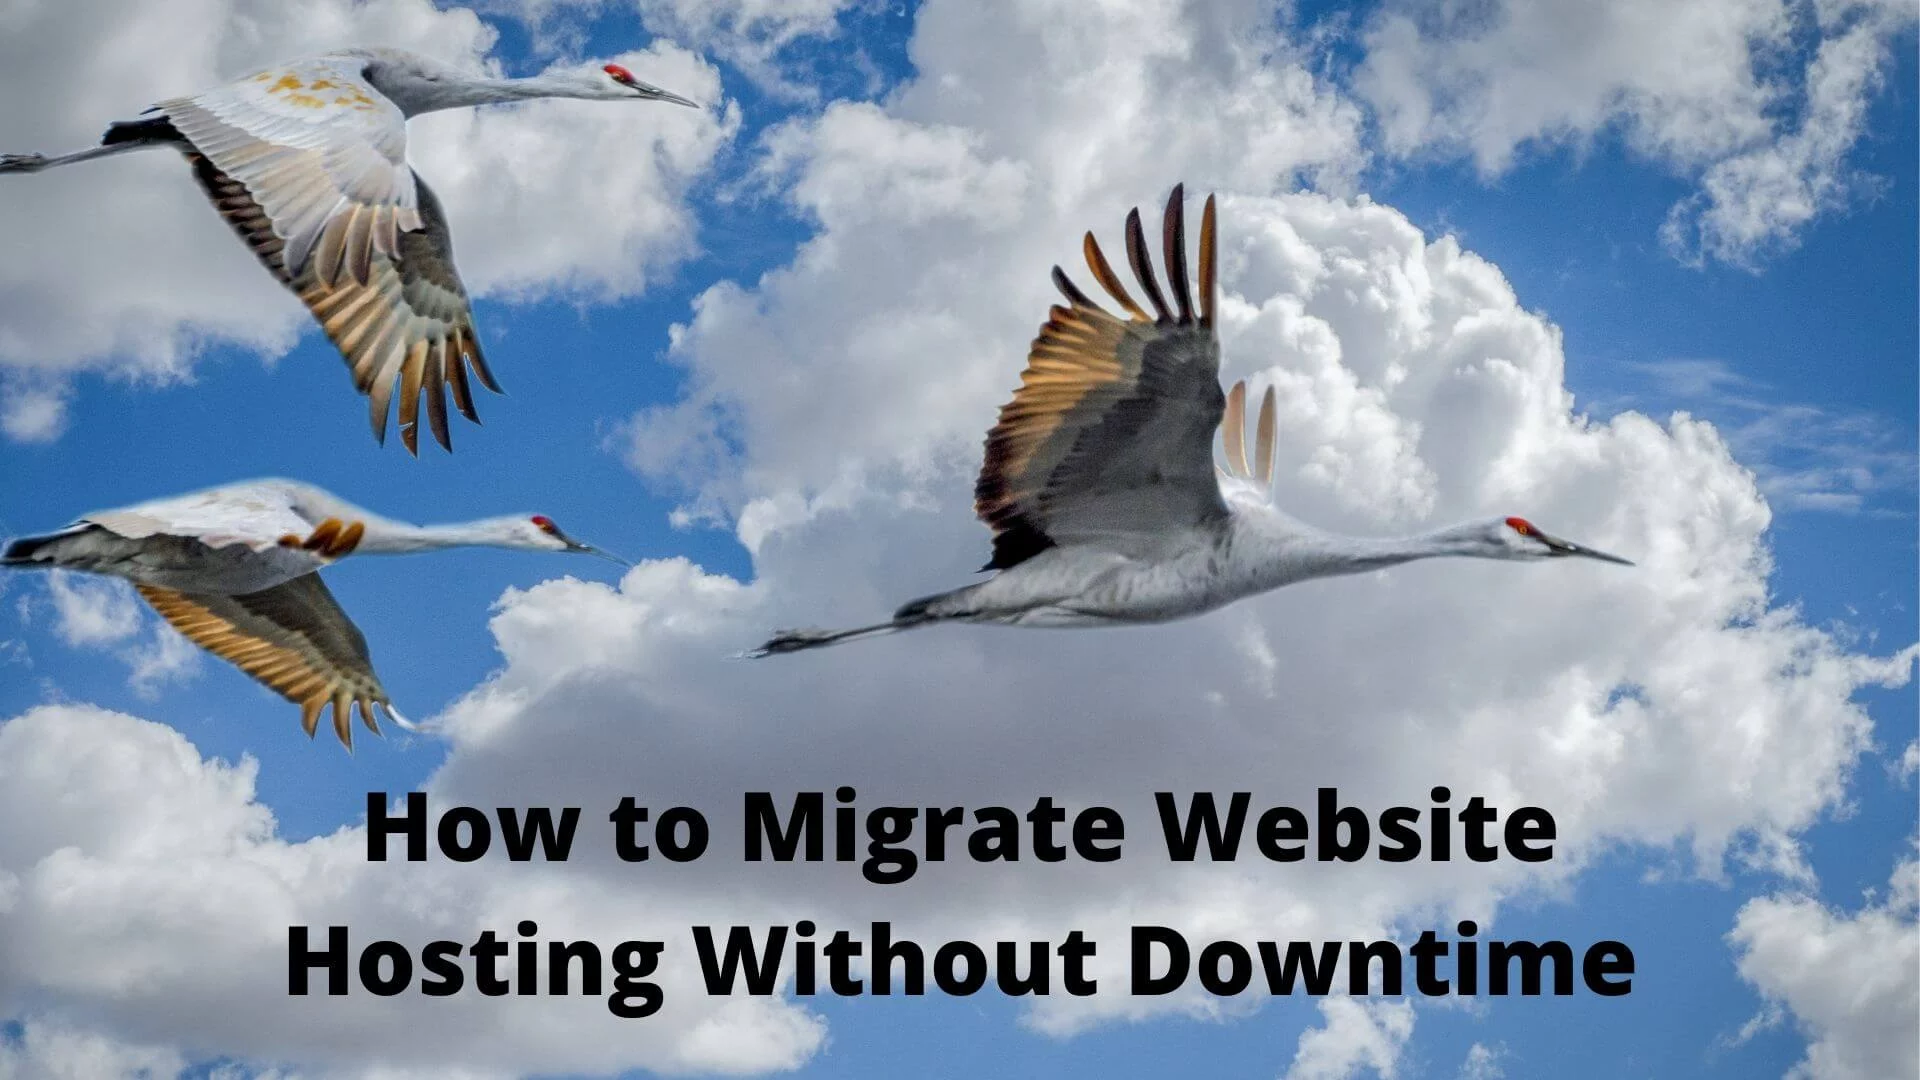 How-to-Migrate-Website-Hosting-Without-Downtime-1